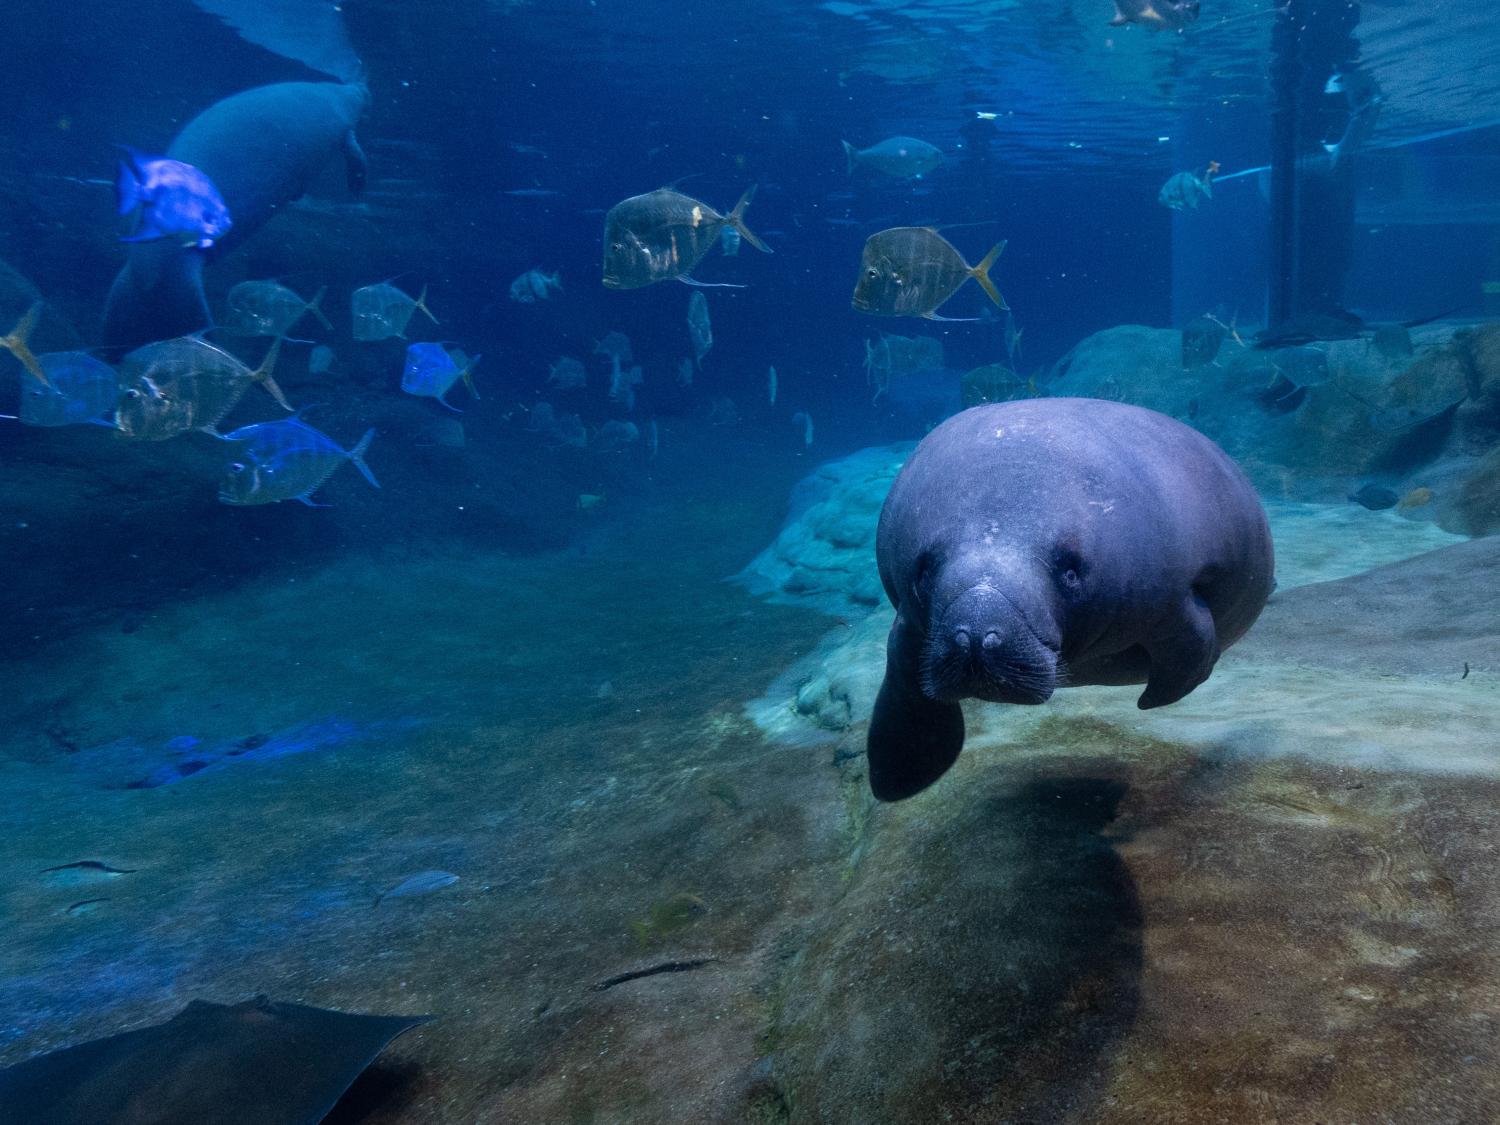 manatee and fish in water